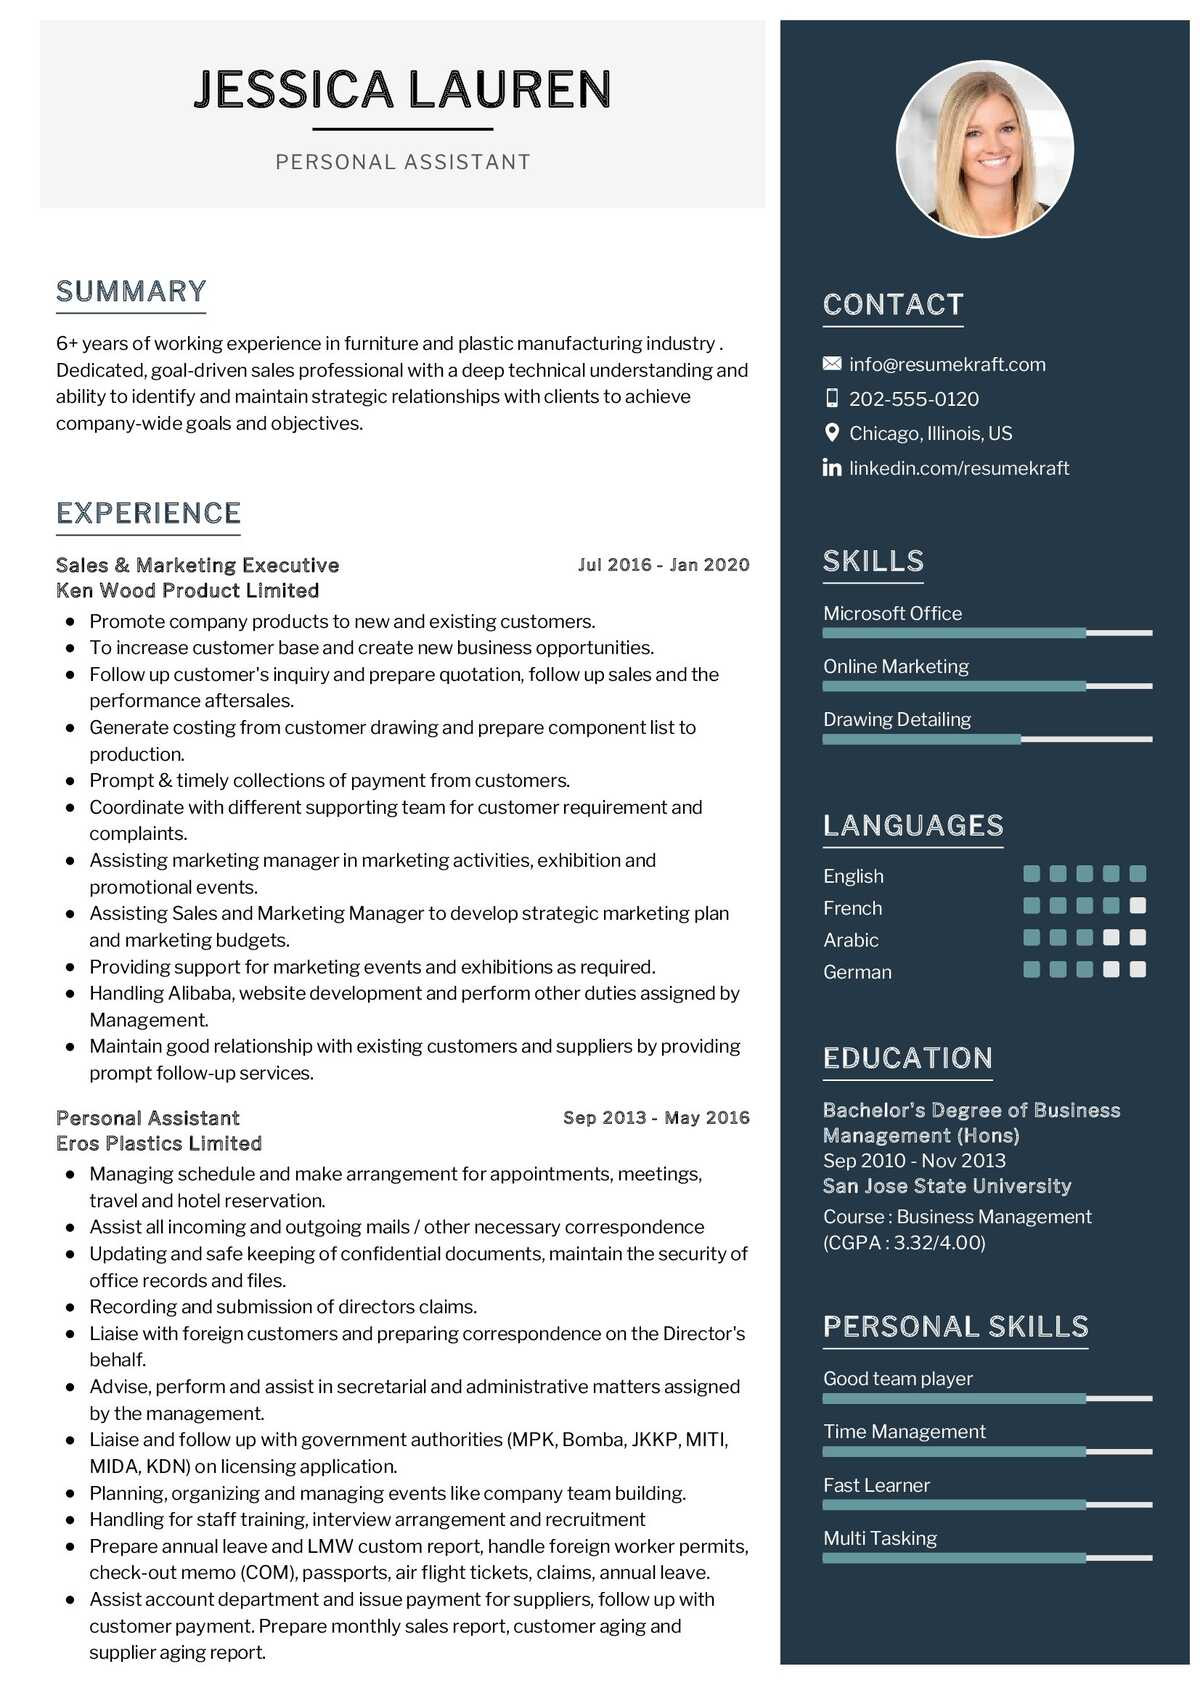 Resume Samples Of A Personal assistant Personal assistant Resume Sample 2021 Writing Guide – Resumekraft